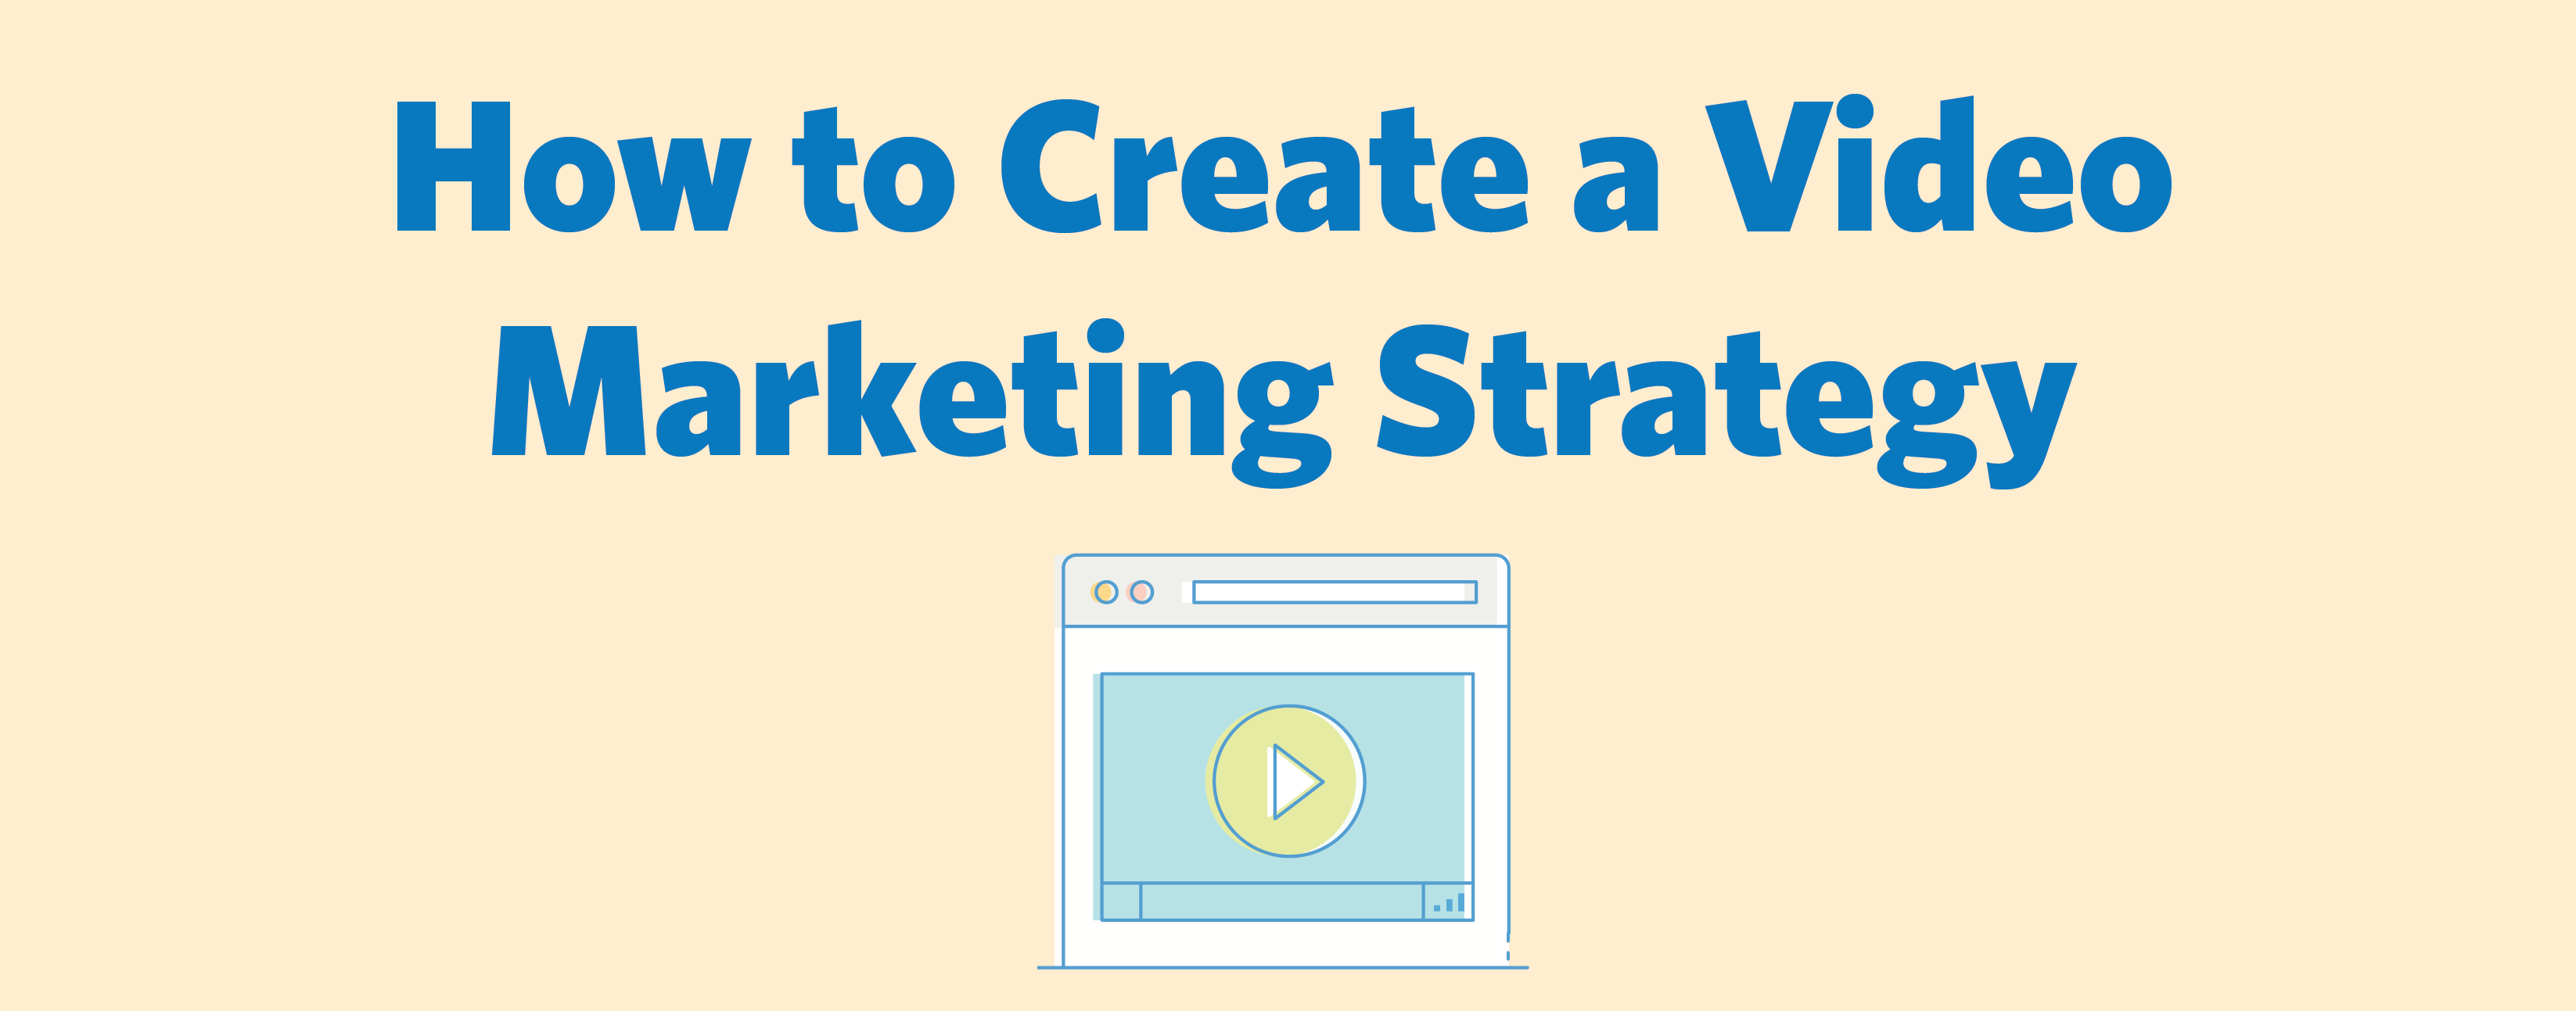 How to Create a Video Marketing Strategy with 5 Easy Steps